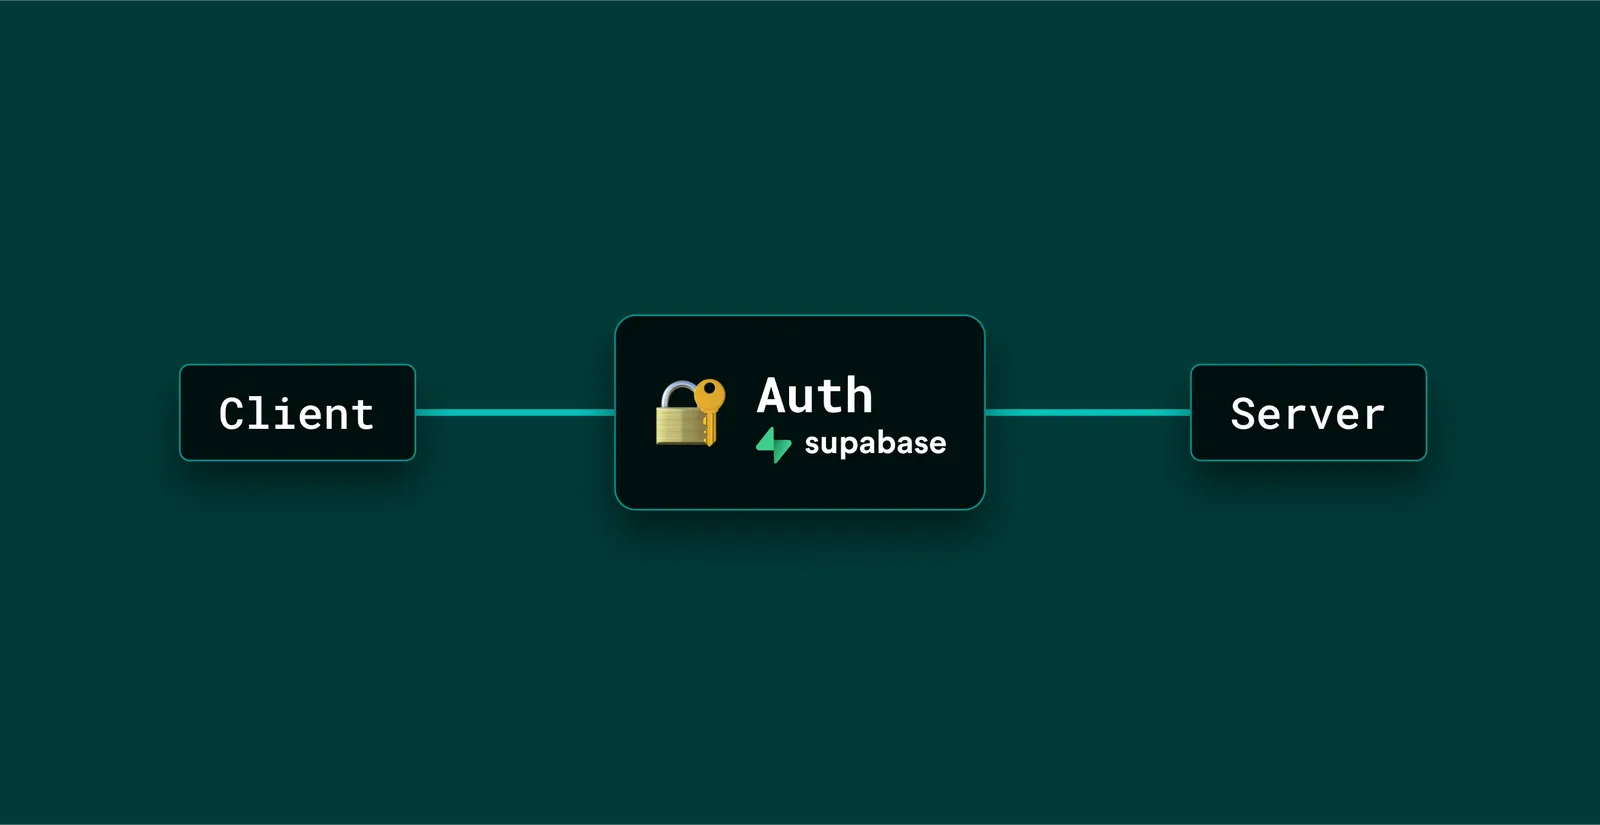 Using Supabase as an Auth Service